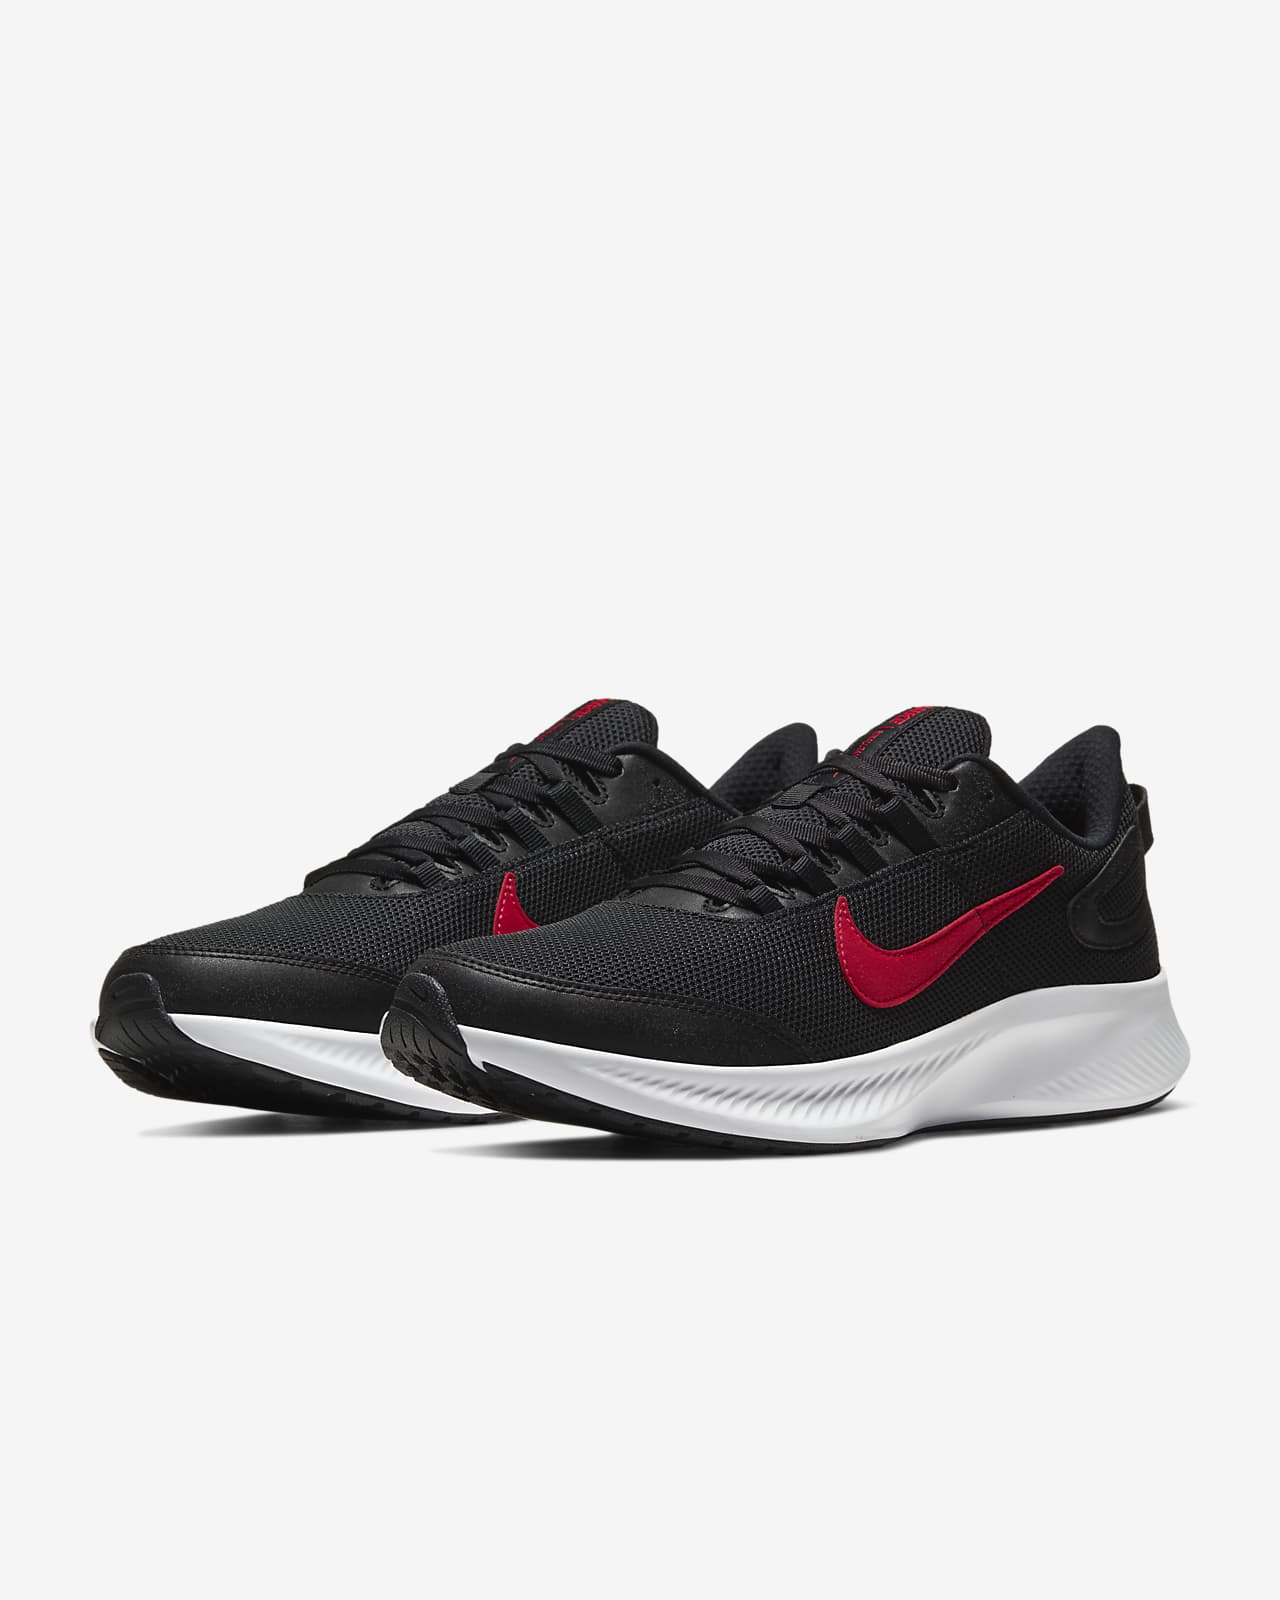 red and black nike running shoes